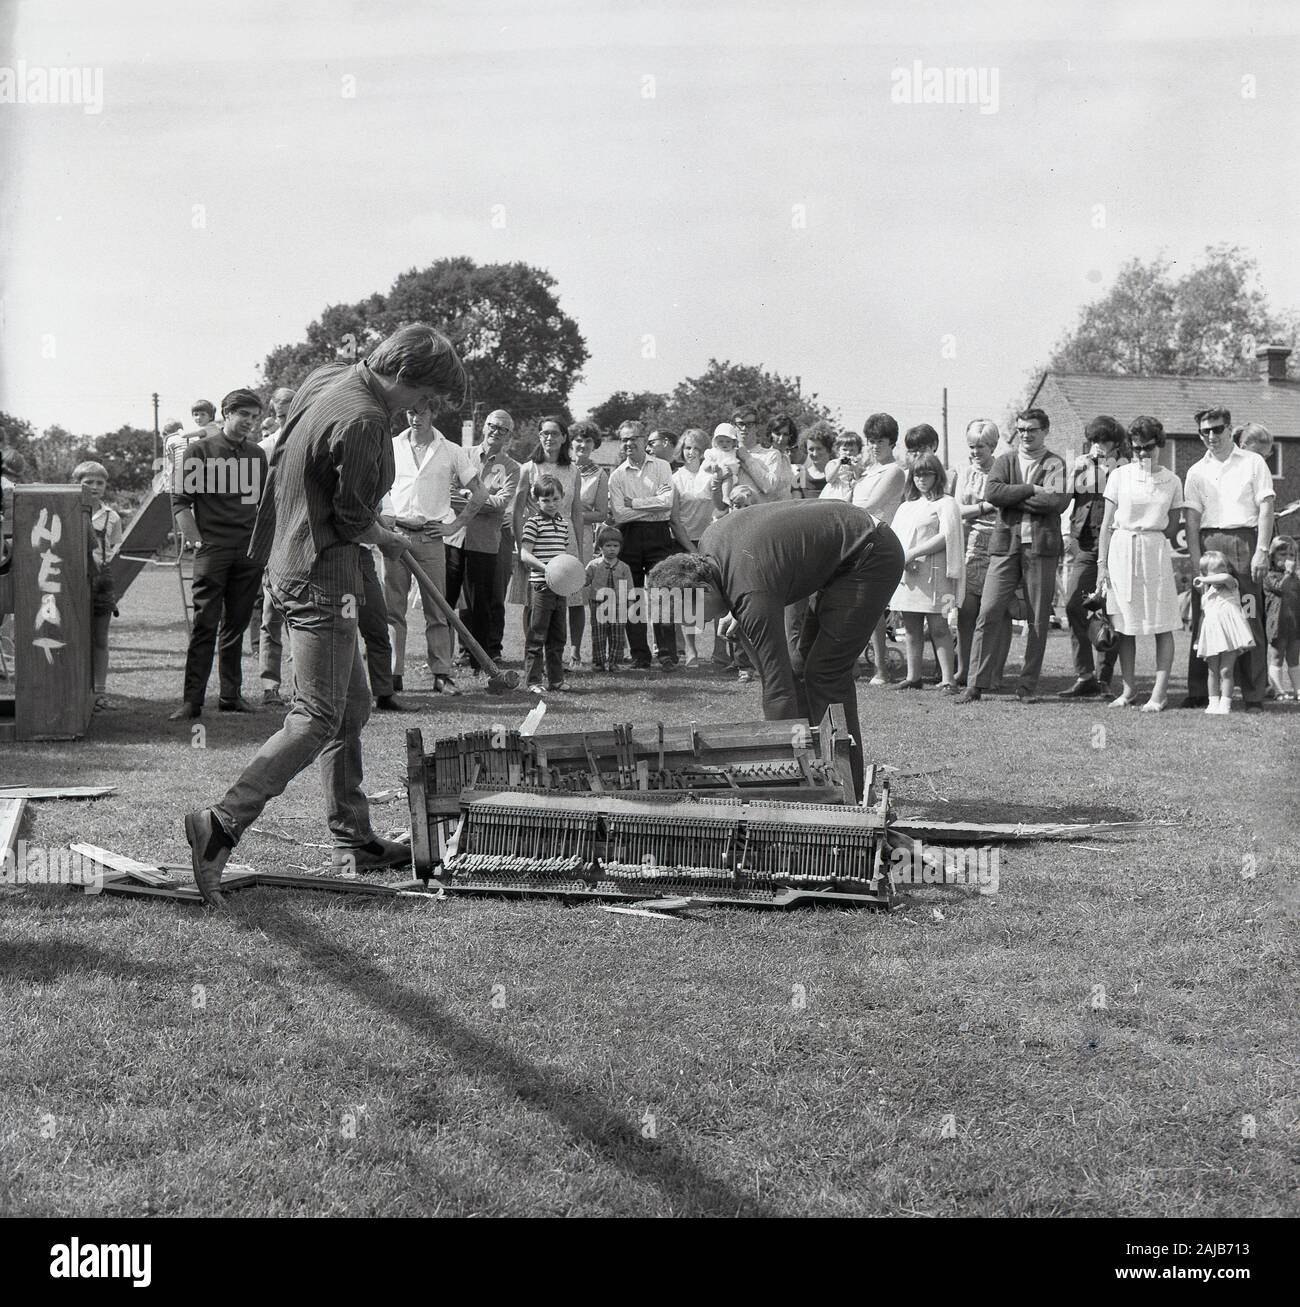 1960s, historical, piano smashing contest, at an English village fete, visitors watch two men using sledgehammers to destroy an upright piano into small pieces which could be passed through a 9-inch diameter hole. Such contests were popular at village fetes in the UK in the 1960s. Stock Photo